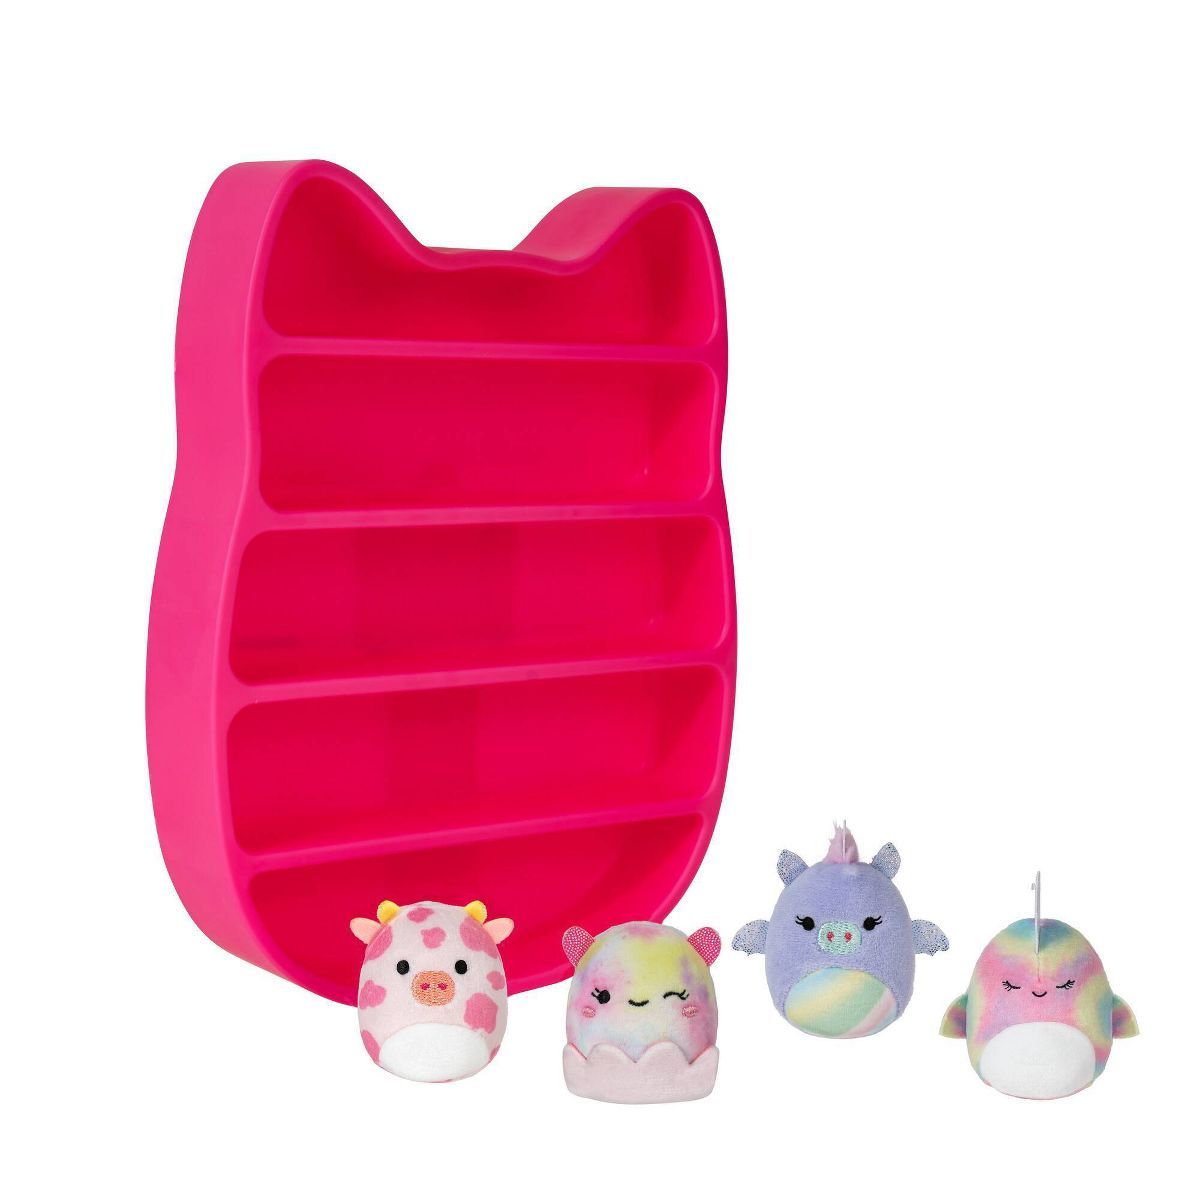 Squishville by Squishmallows Pink Play & Display | Target